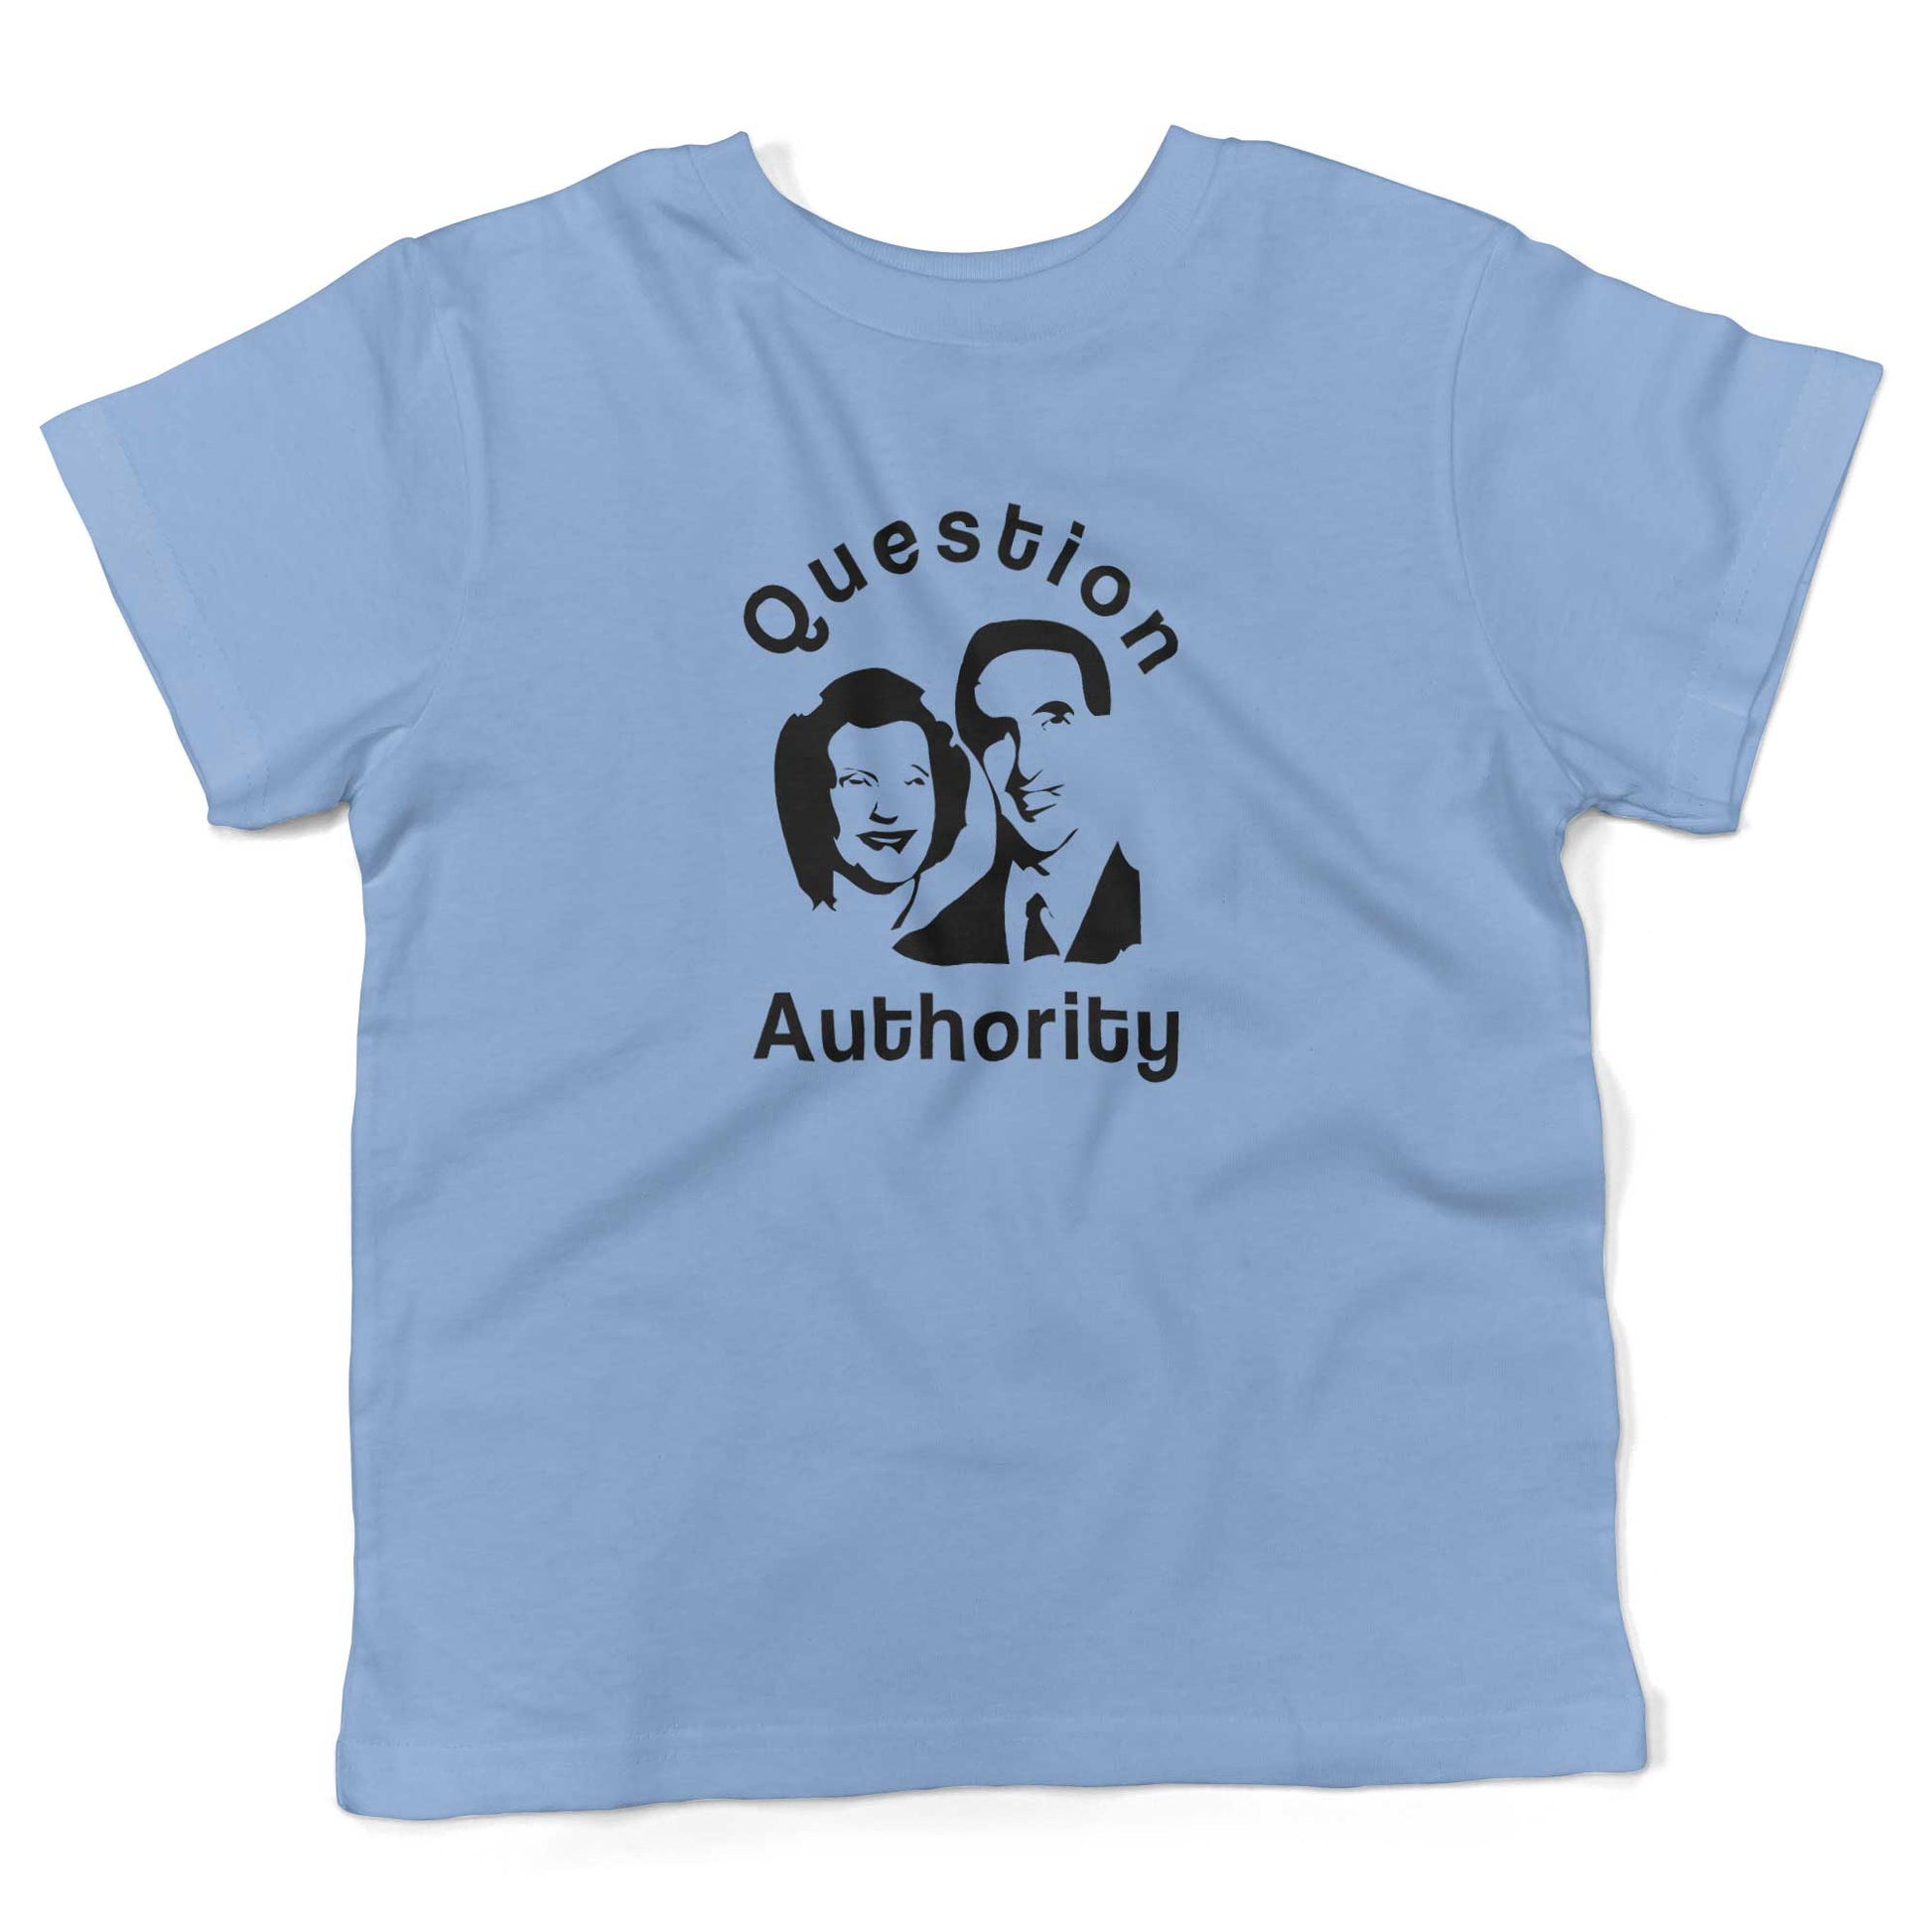 Question Authority Toddler Shirt-Organic Baby Blue-2T